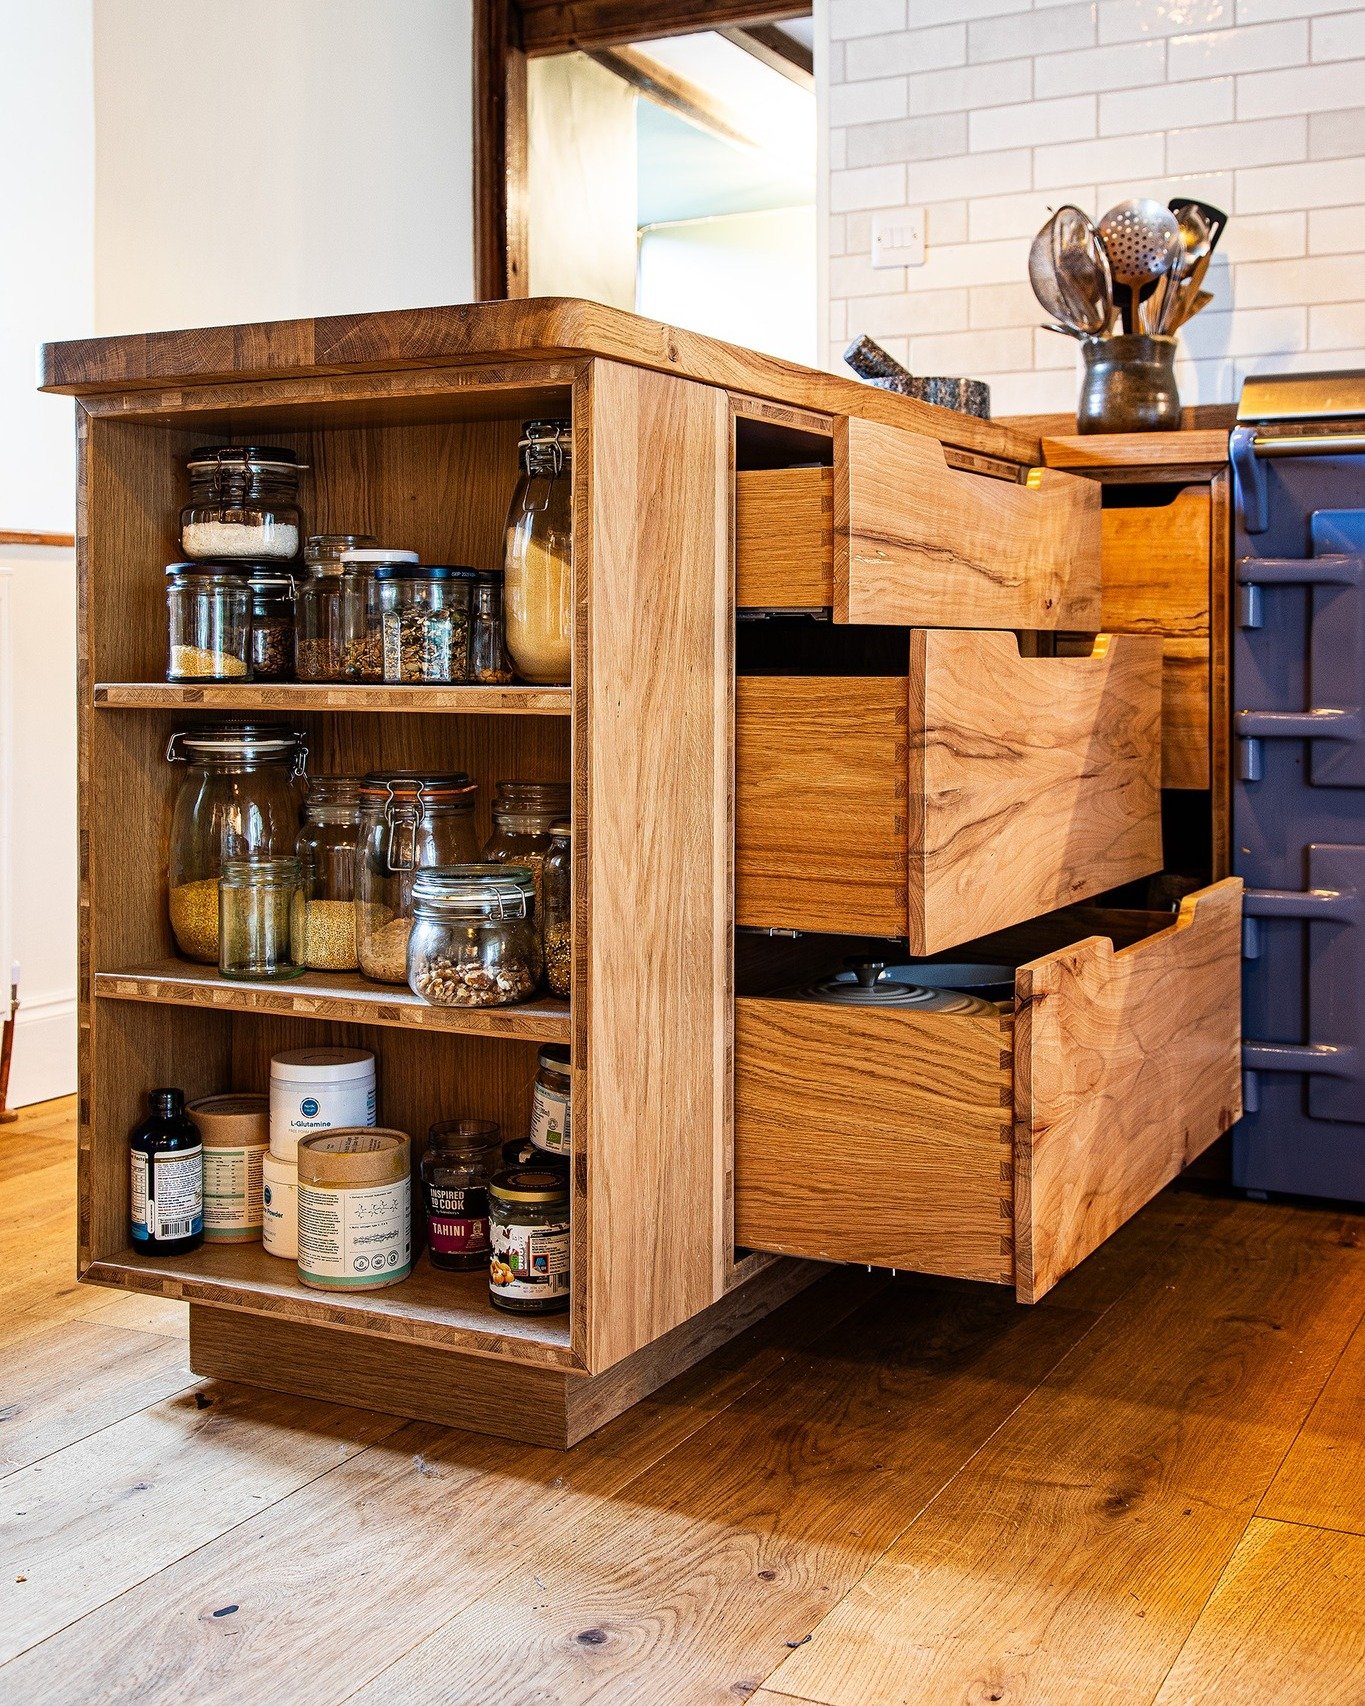 There is a lot of wood in this kitchen! Here is a breakdown of materials used:

Carcase: engineered oak
Drawer fronts: spalted beech
Worktops: solid oak
Cabinet doors: engineered oak frame and bookmatched spalted beech centre panel
Floor: engineered 